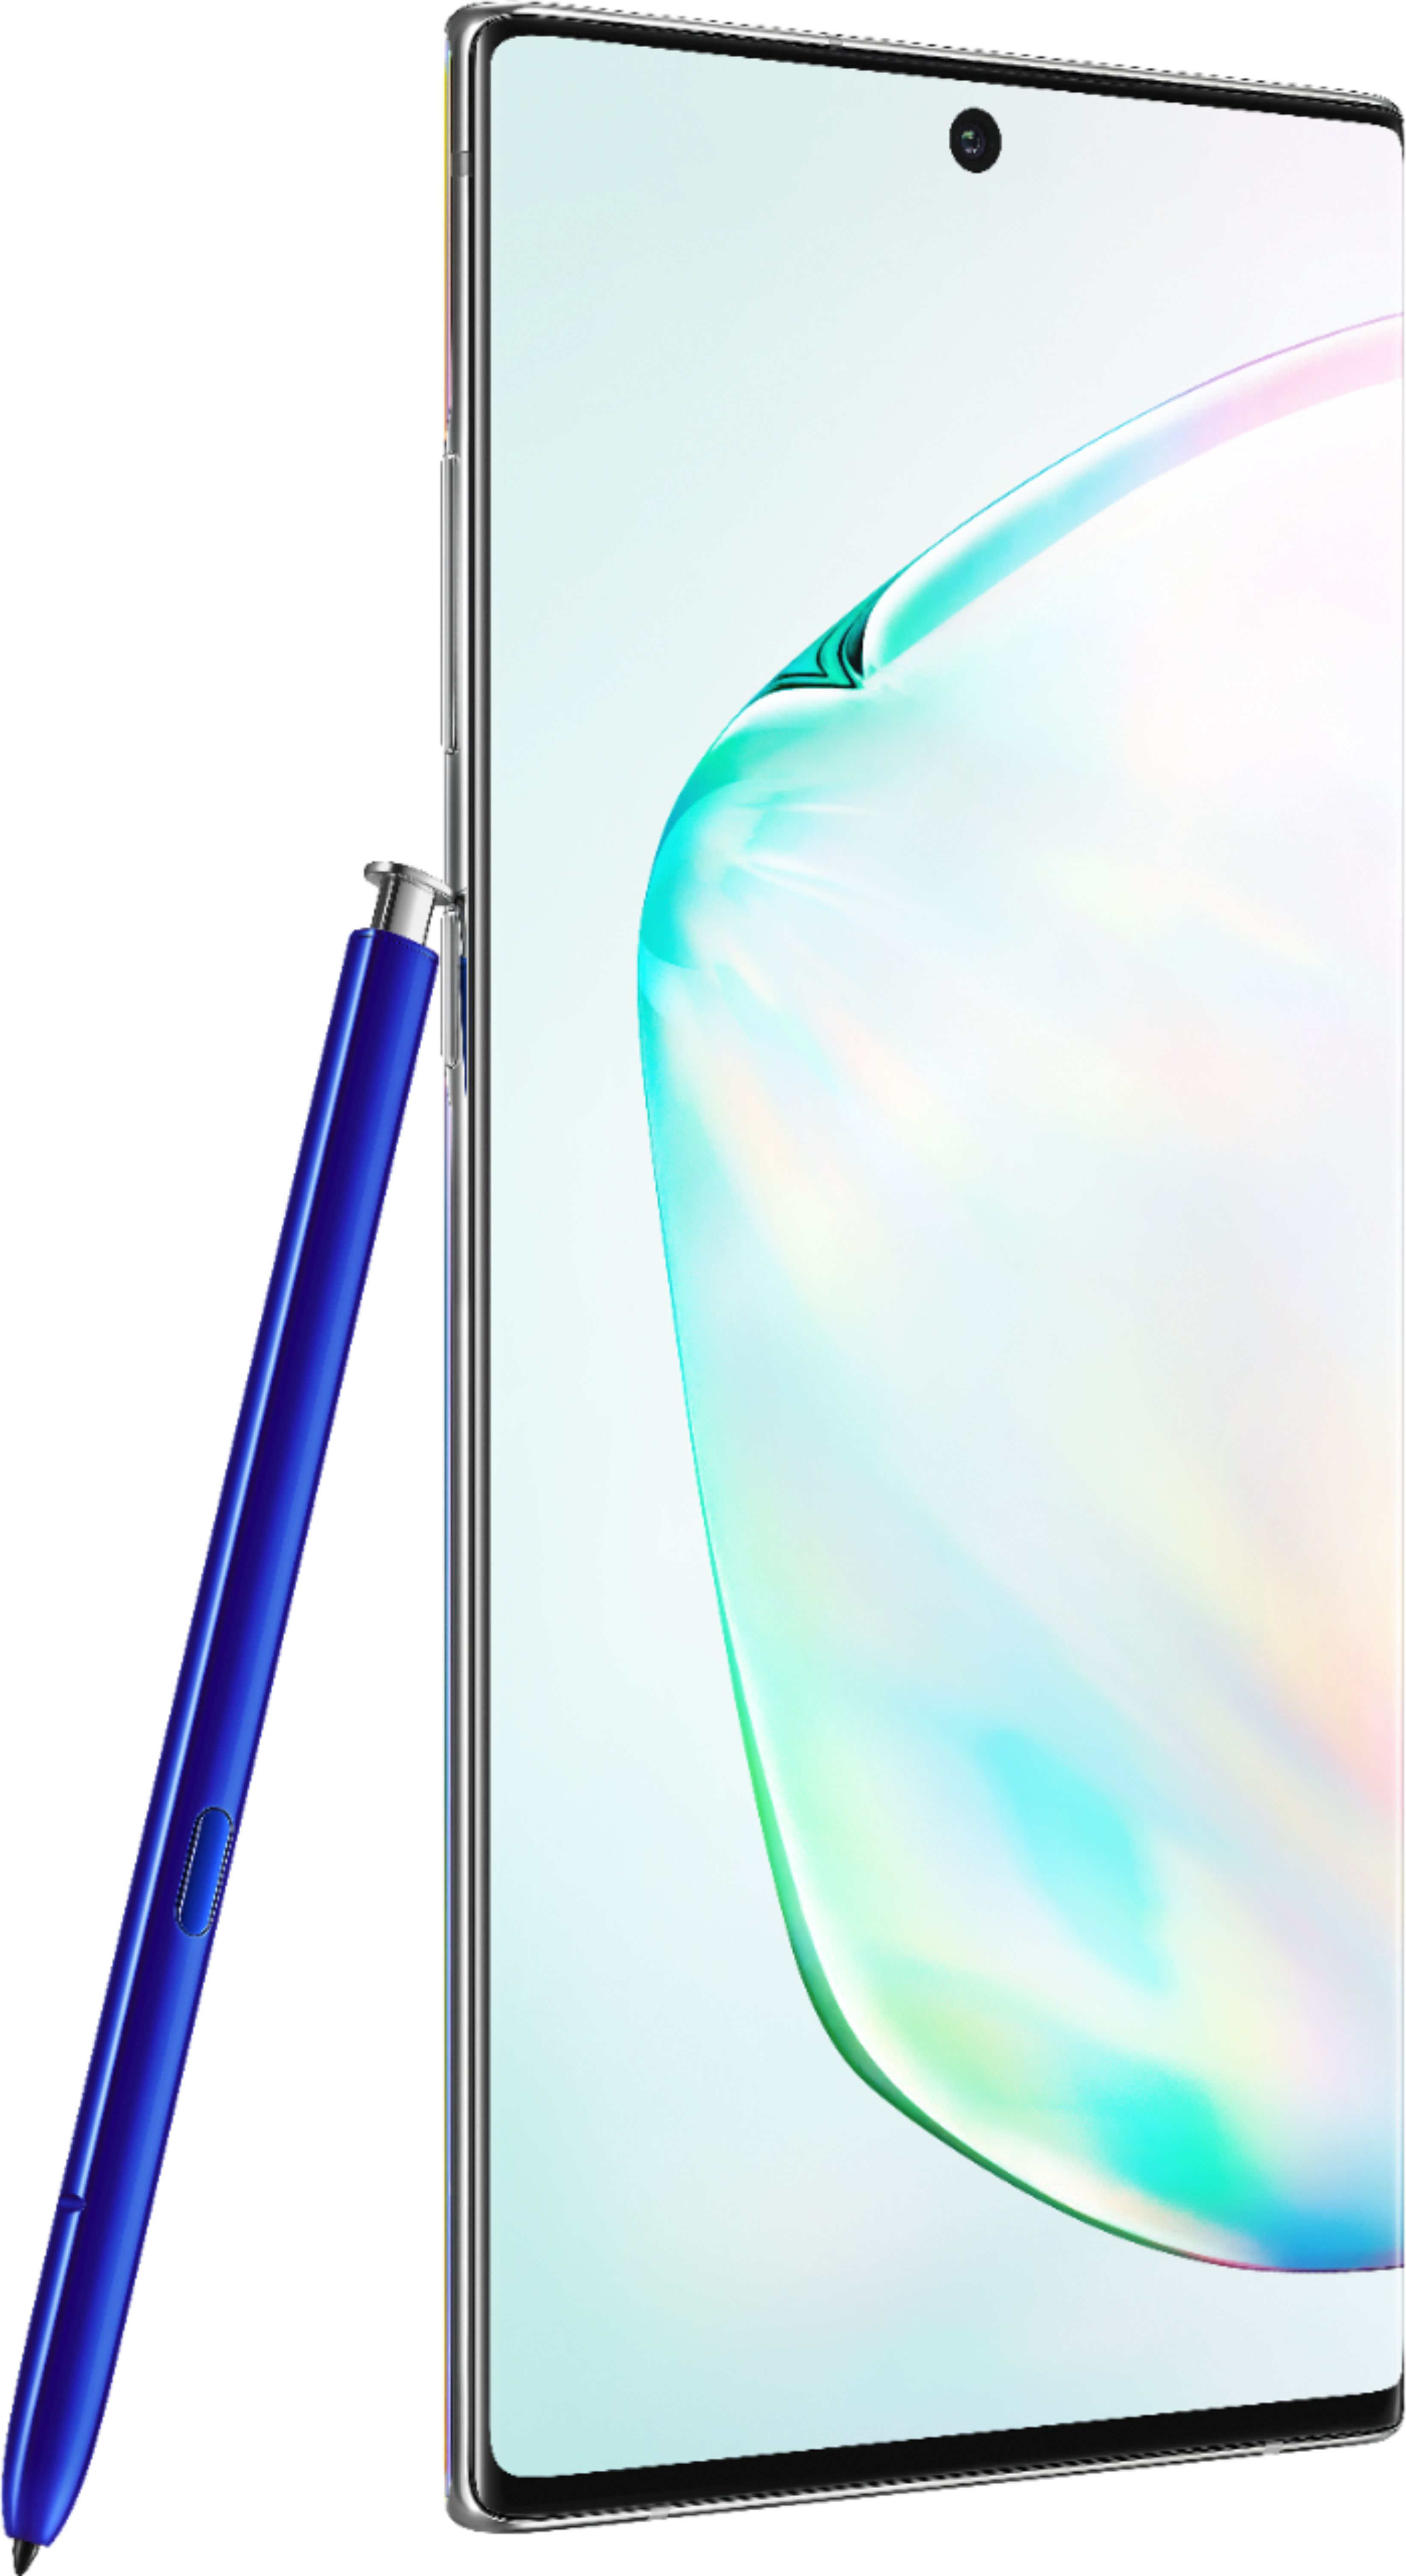 Angle View: Samsung - Geek Squad Certified Refurbished Galaxy Note10+ with 256GB Memory Cell Phone (Unlocked) - Aura Glow